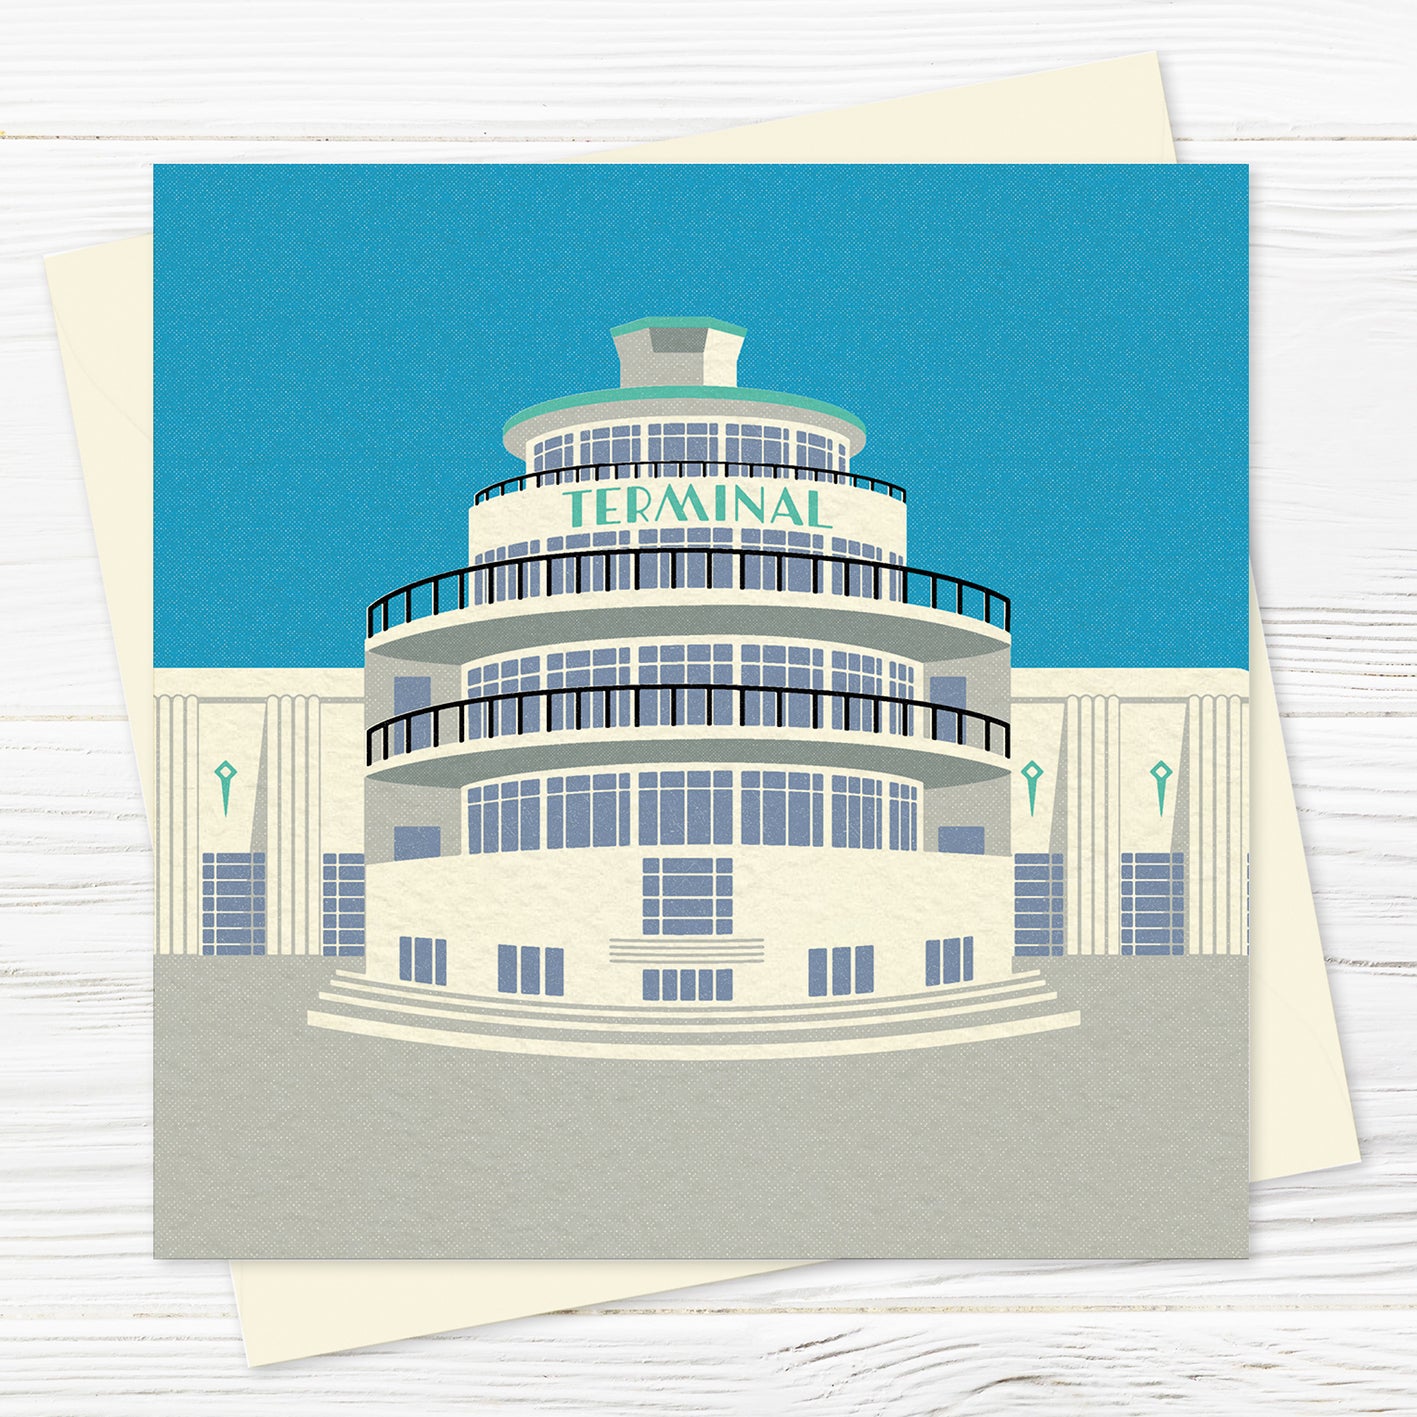 A  greetings card and envelope featuring a stylised illustration of an circular art deco airport building in blue, grey and green with the word 'terminal' across the front of the building.